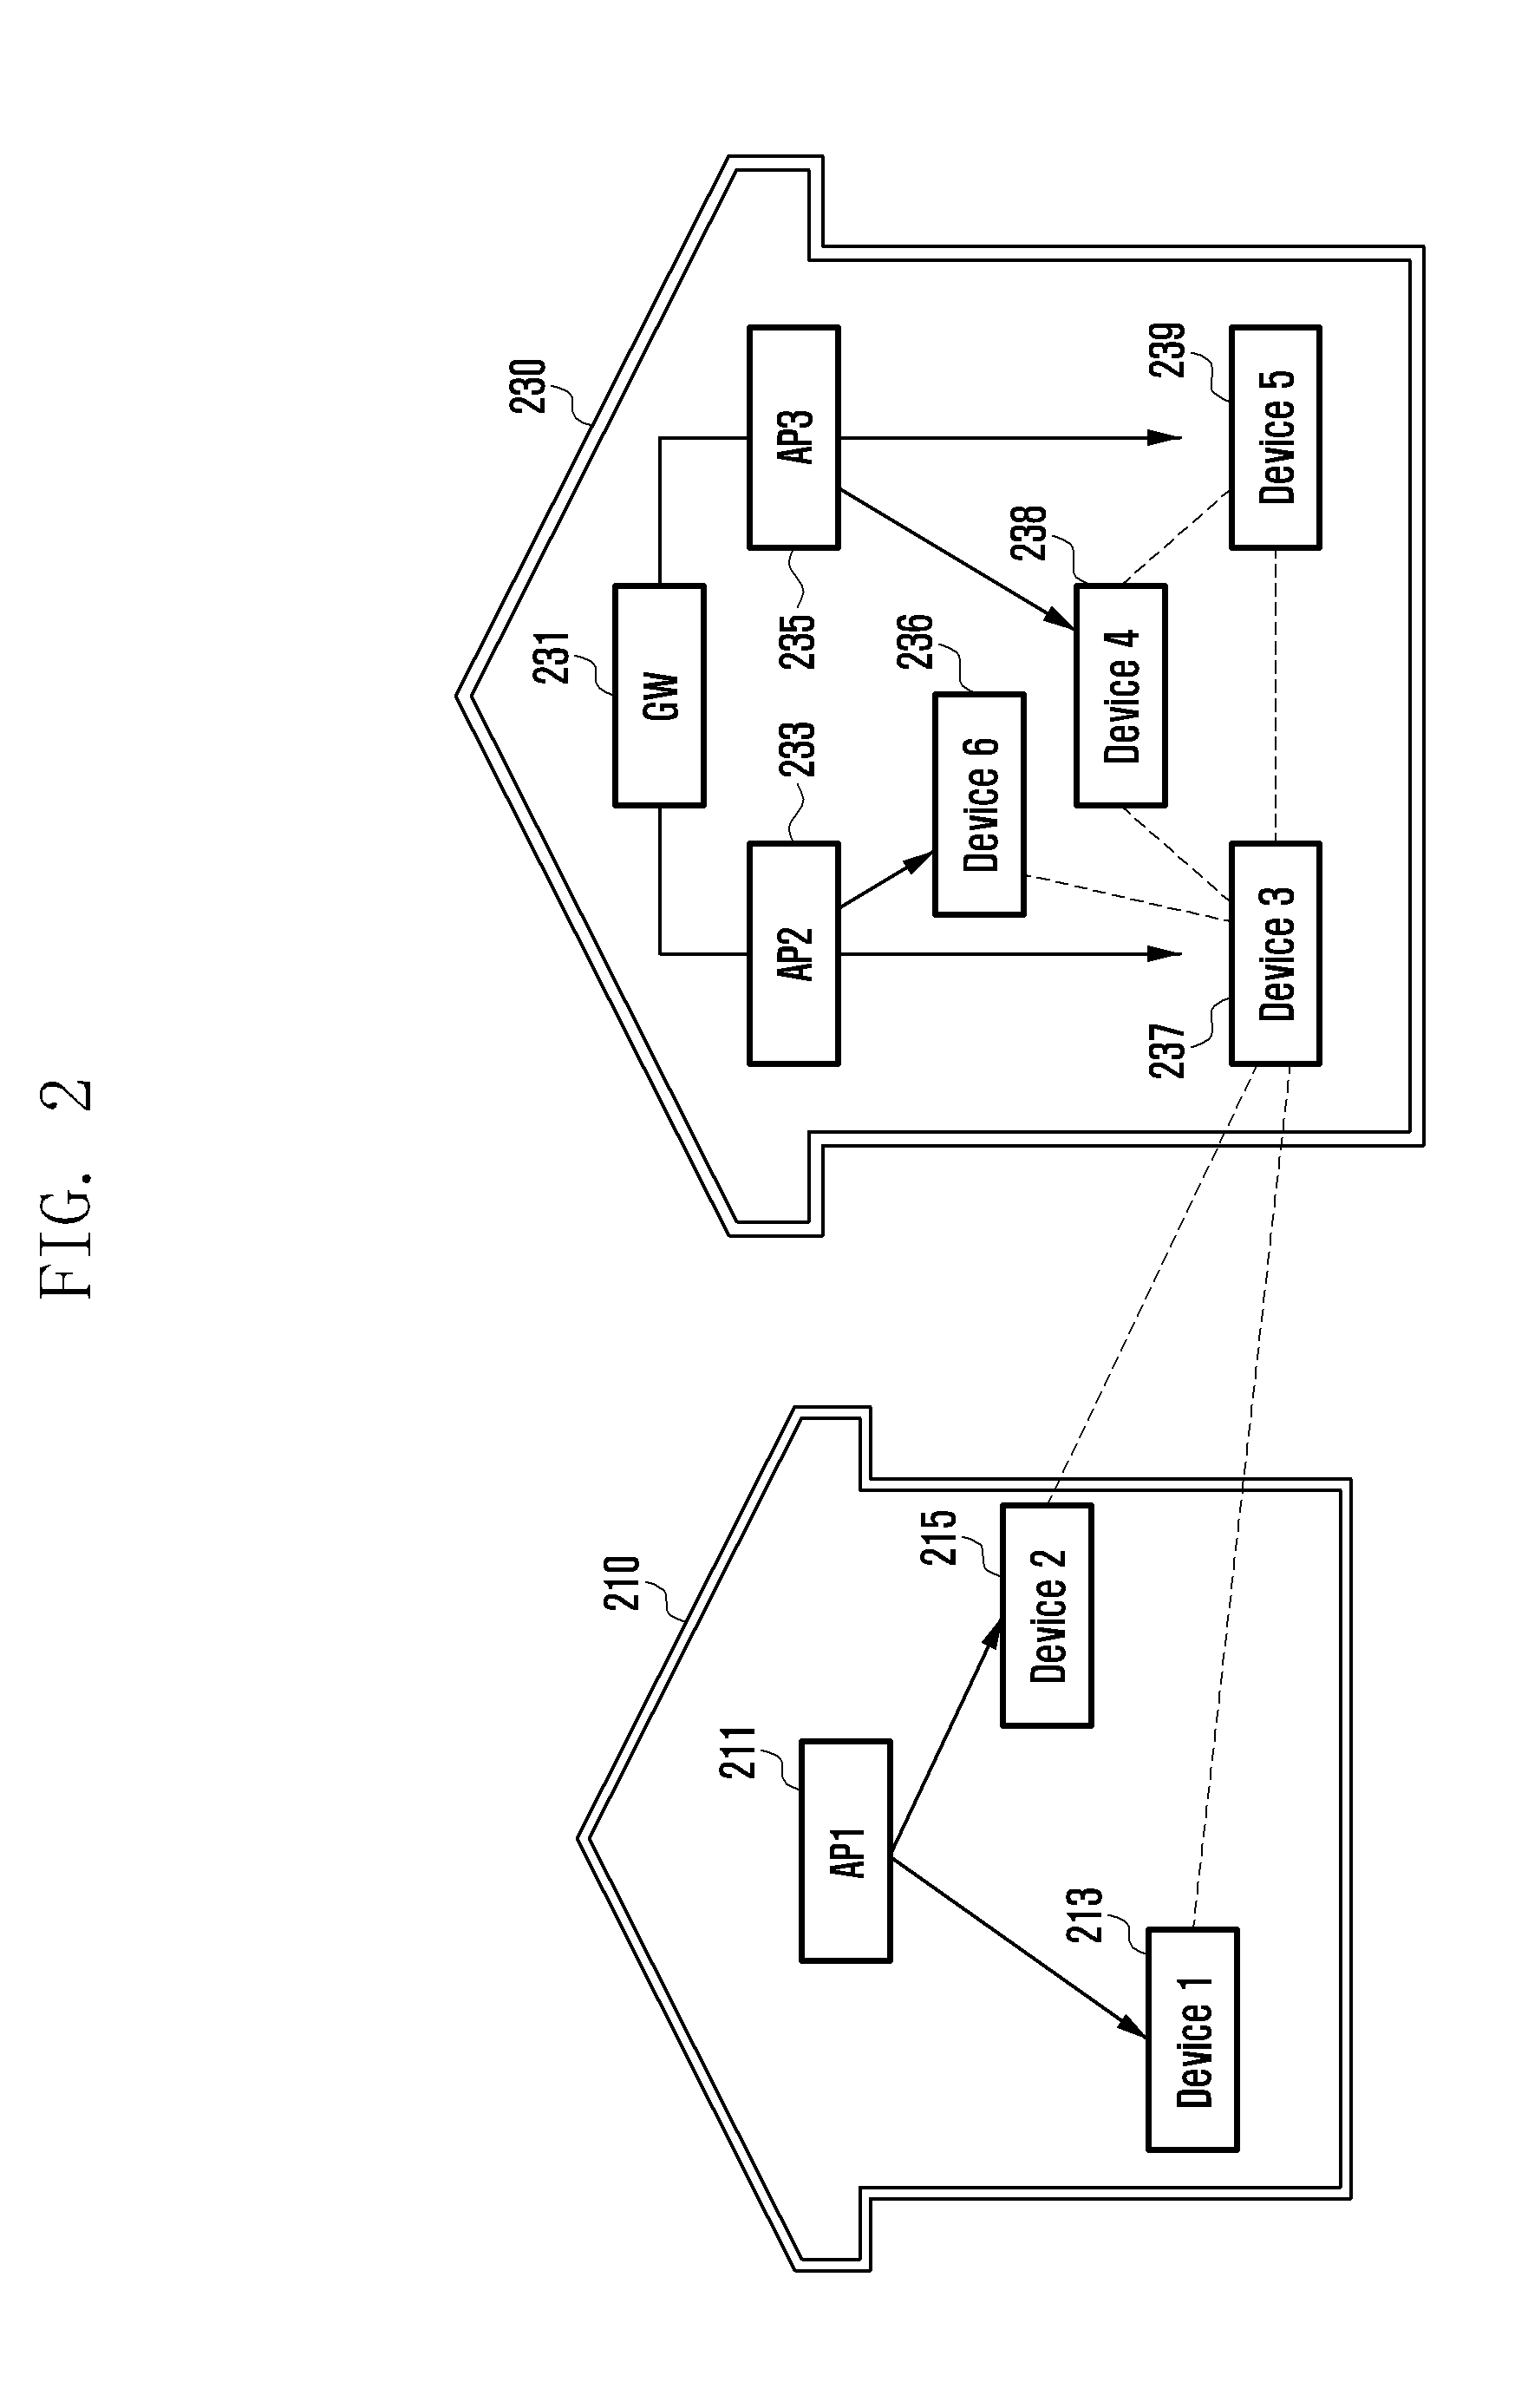 Method and apparatus for discovering device based on location information